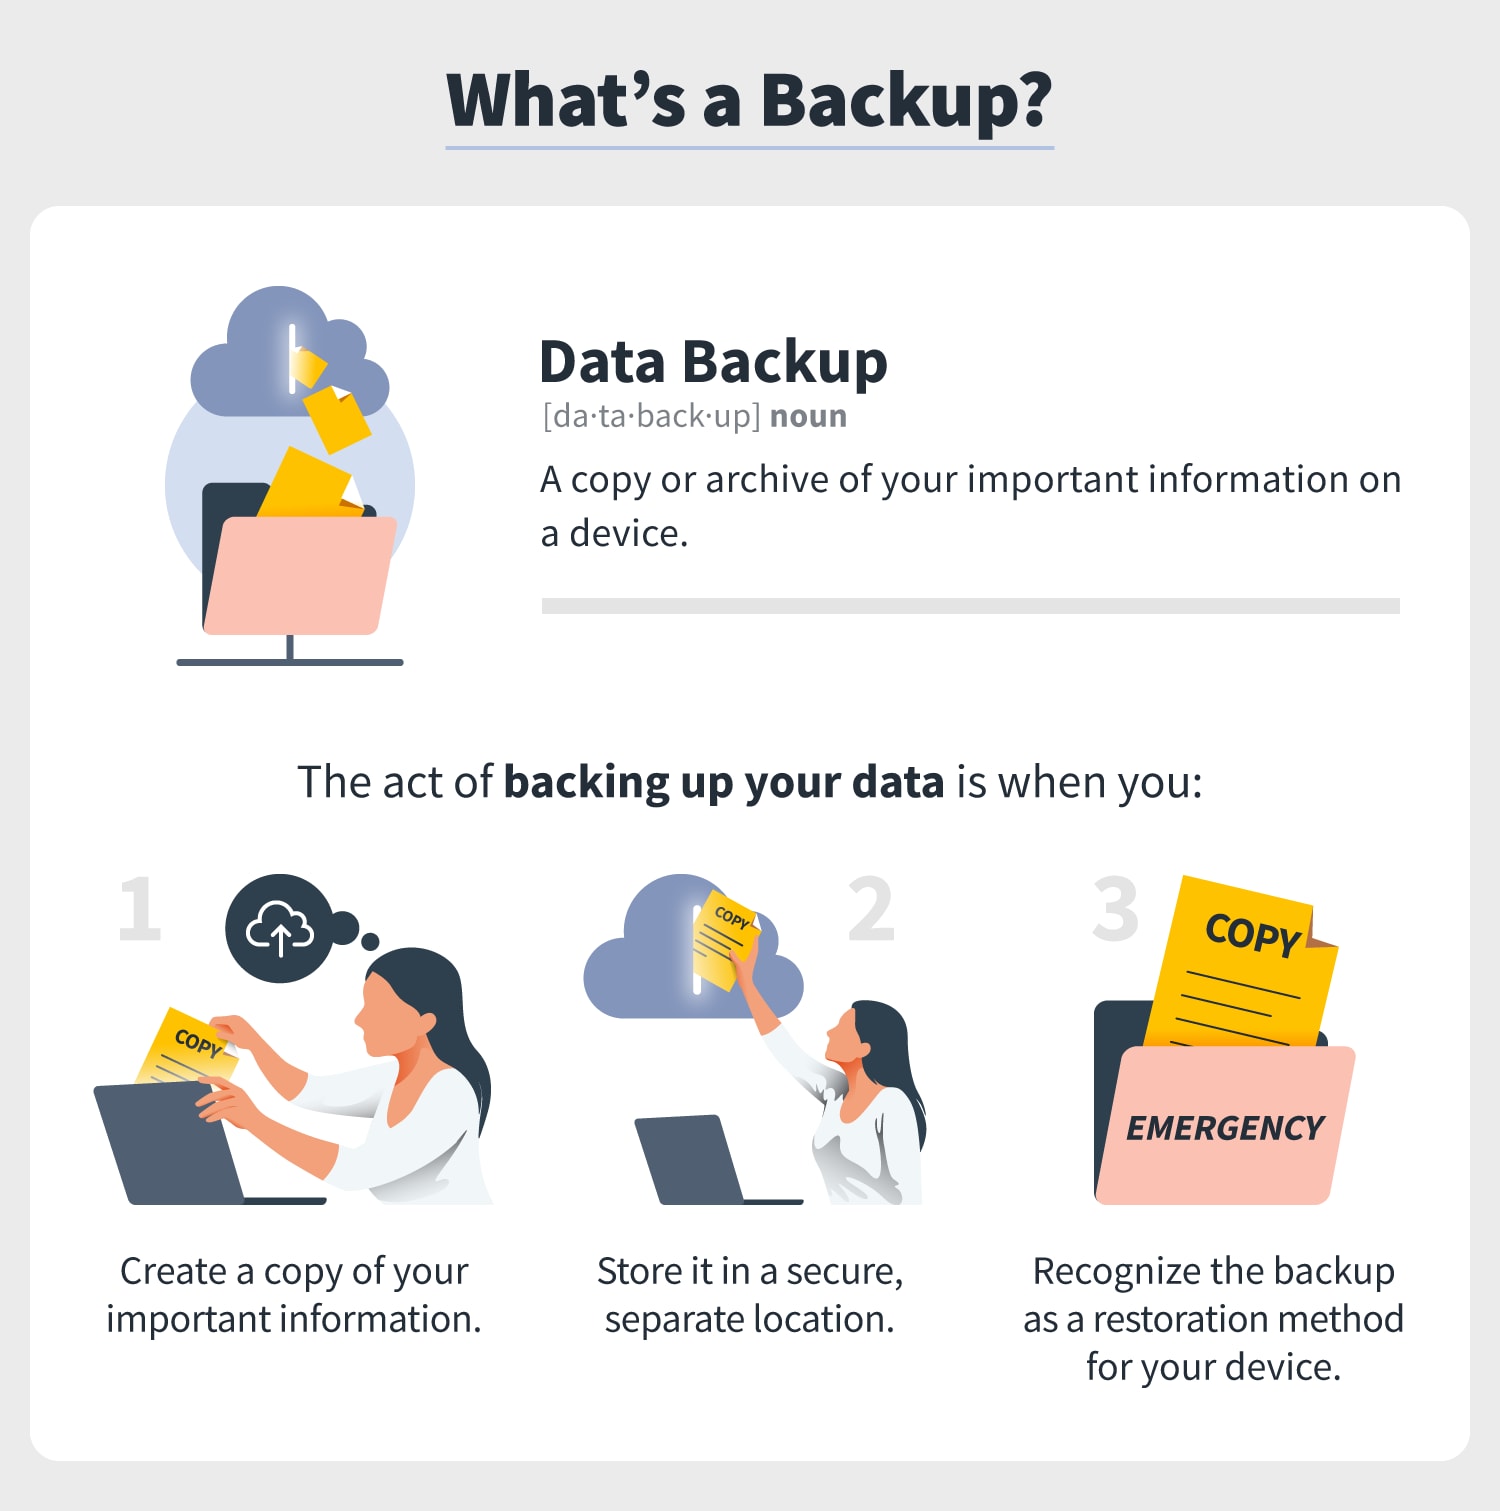 a definition of a data backup and an explanation of what backing up your data means